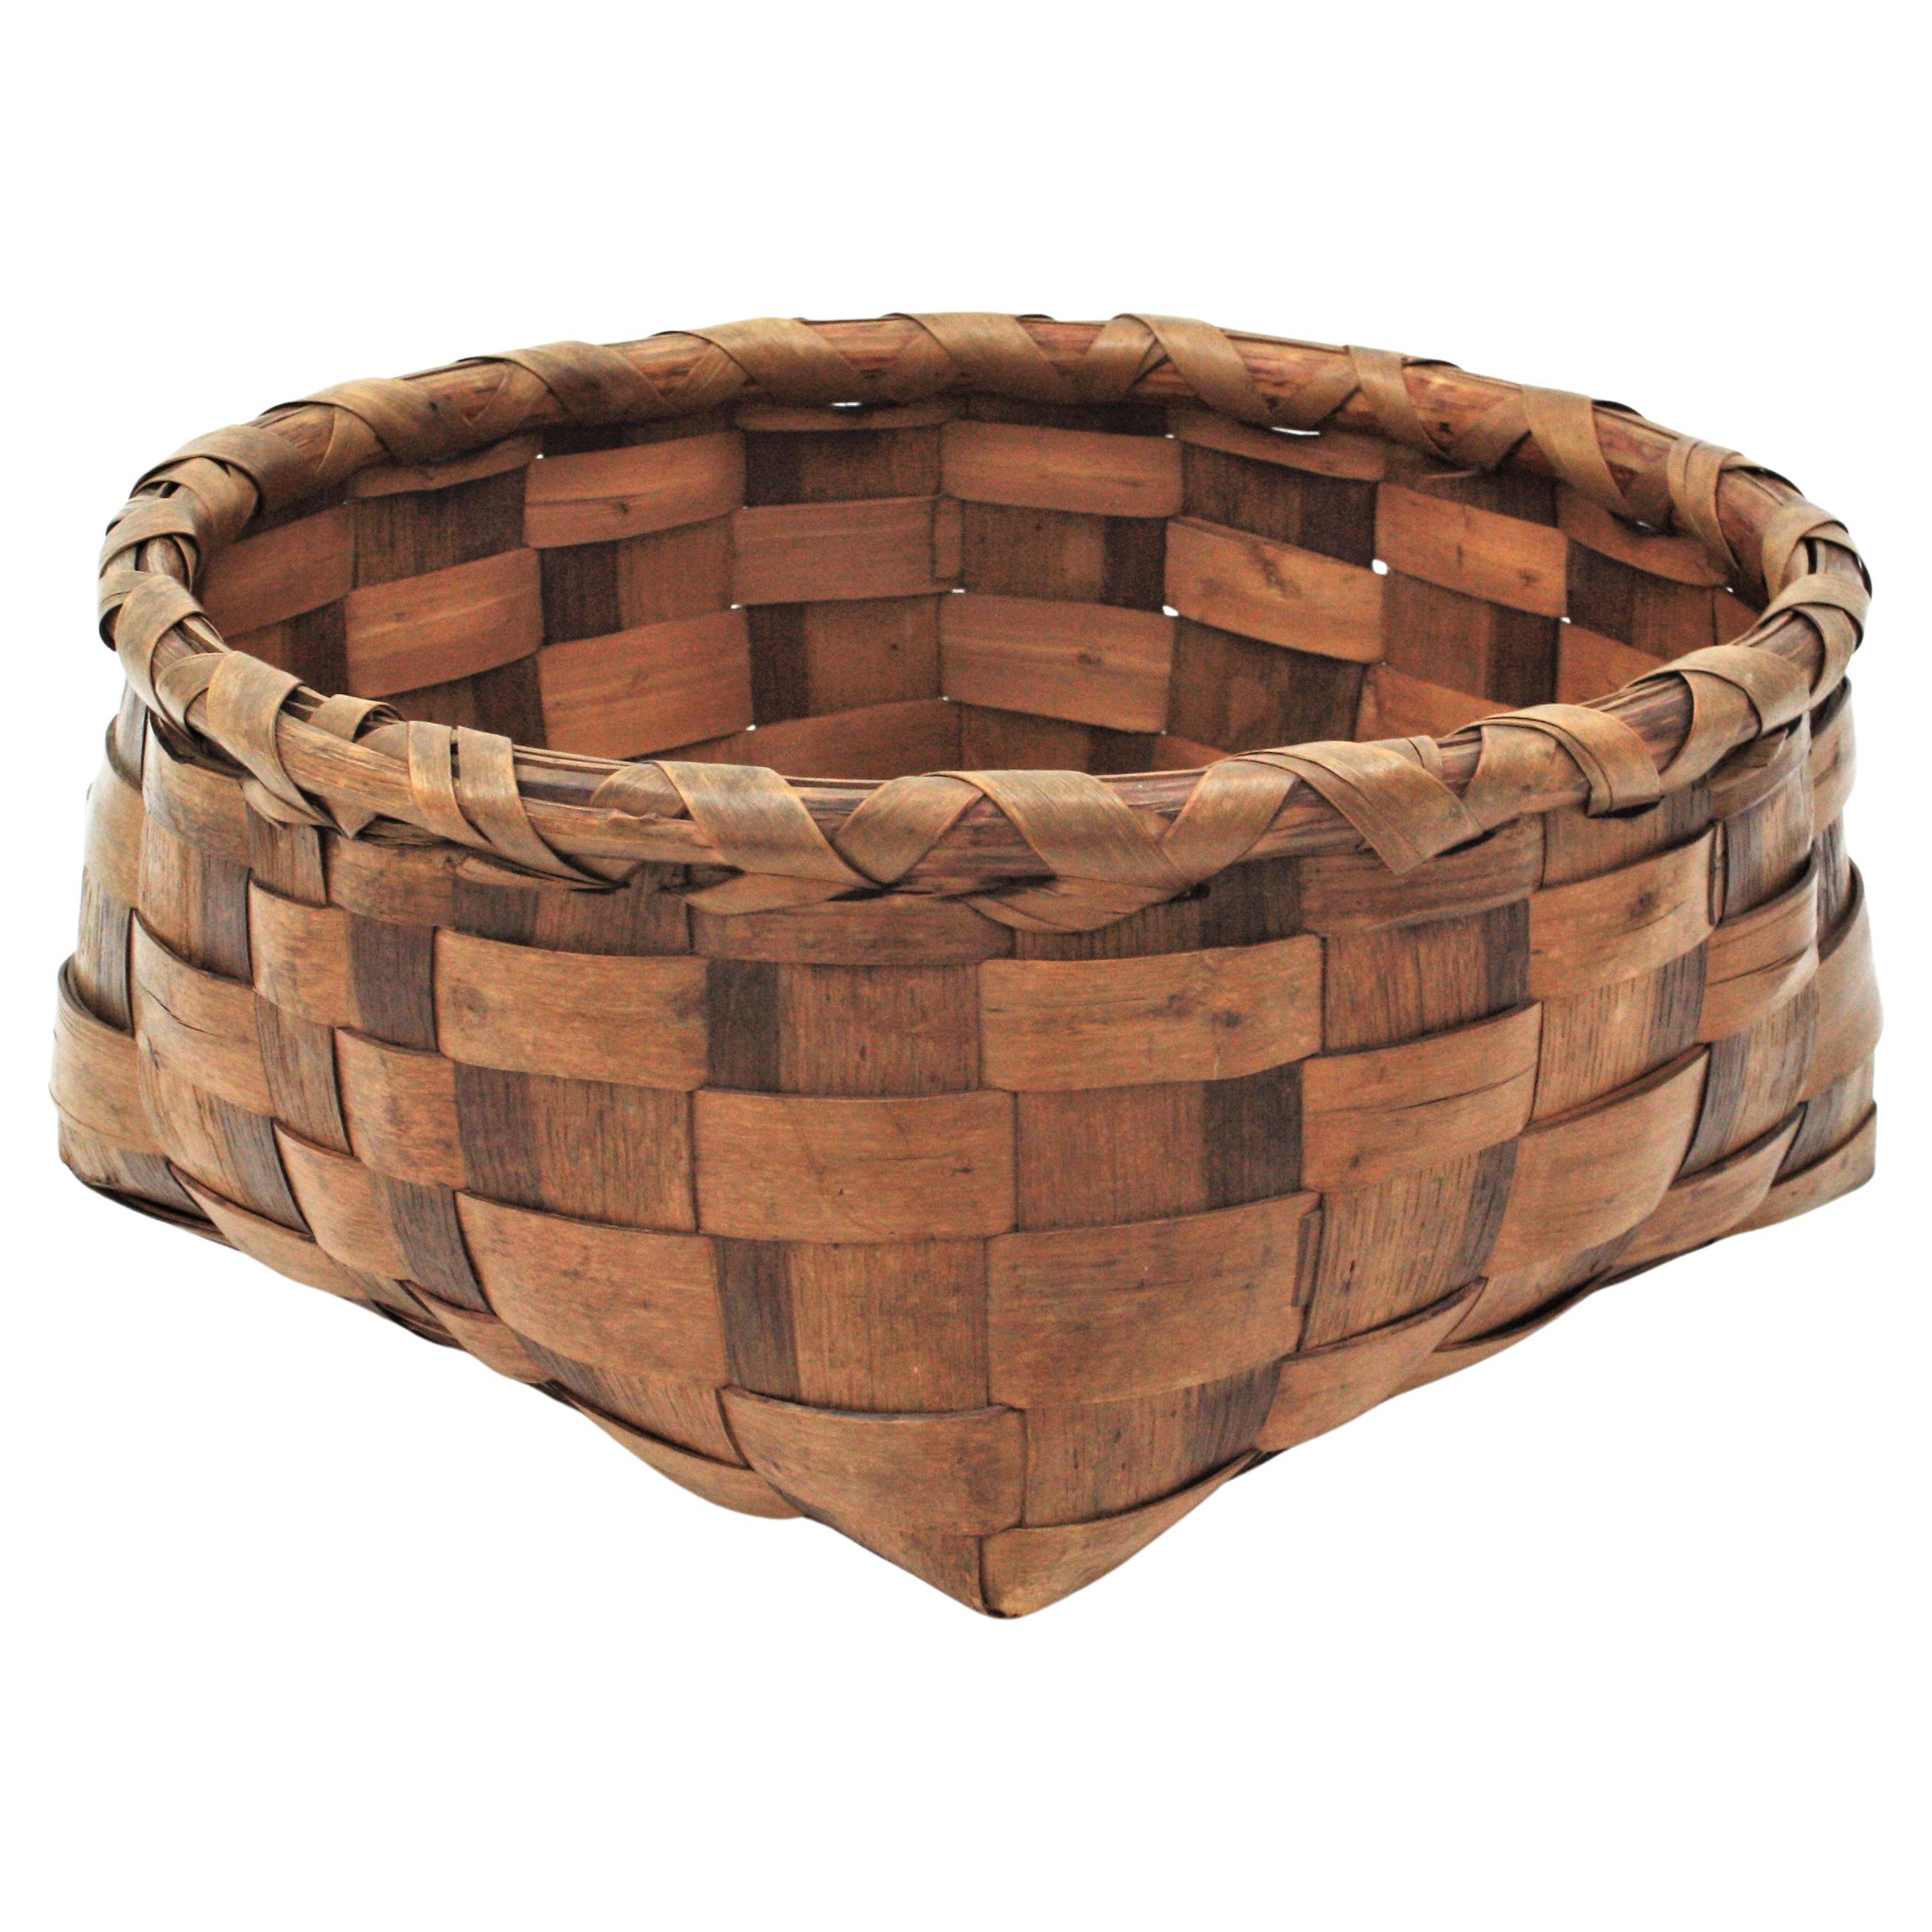 Spanish Braided Wood Large Rustic Basket, 1940s For Sale